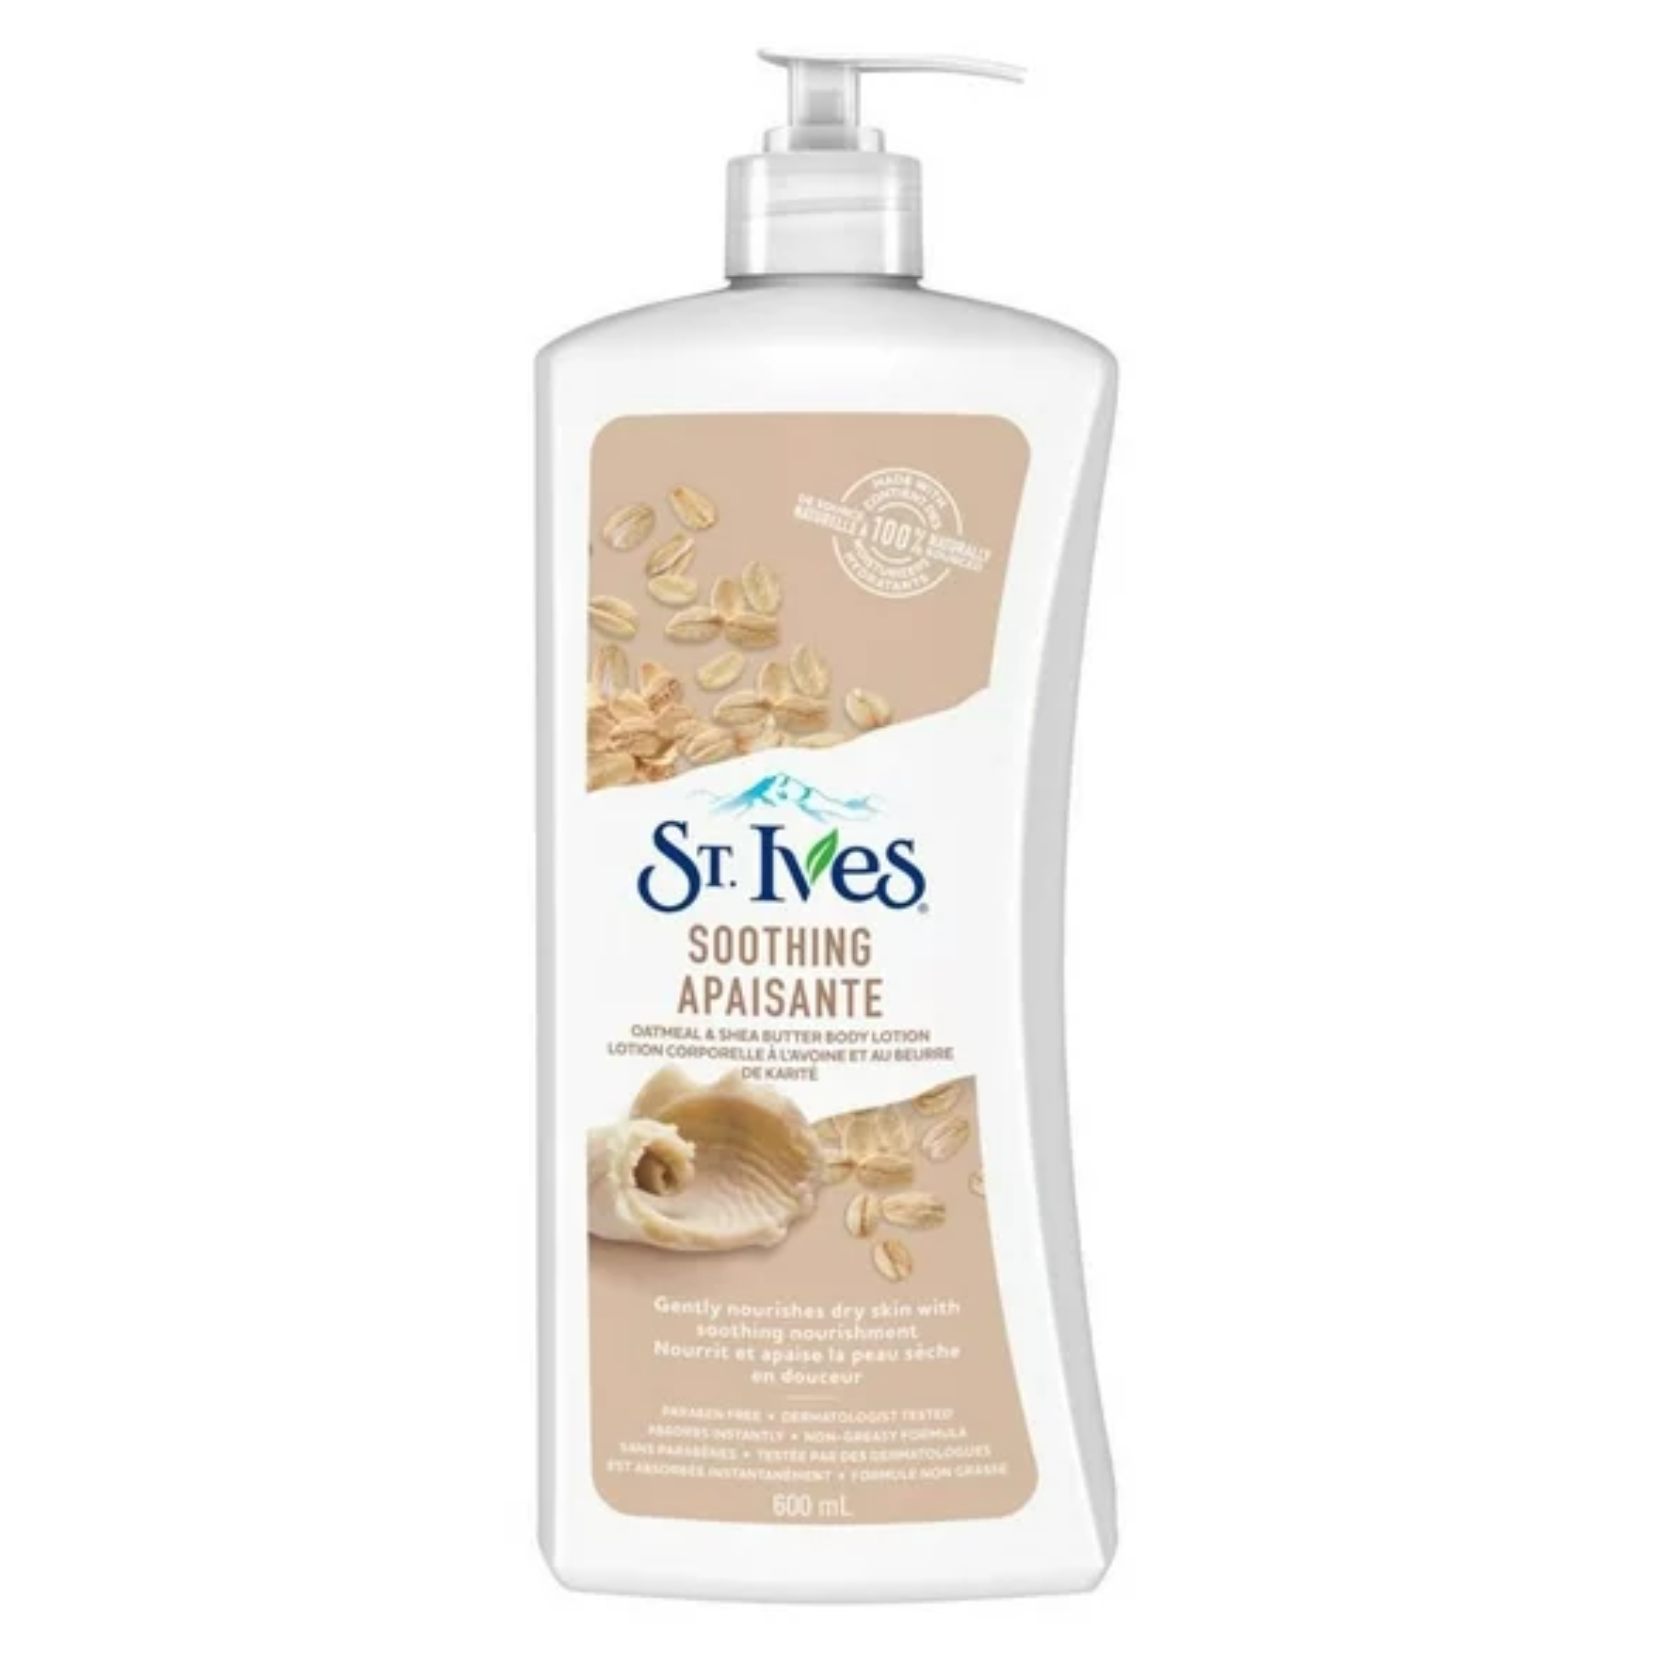 St. Ives Oatmeal And Shea Butter Lotion 600ml